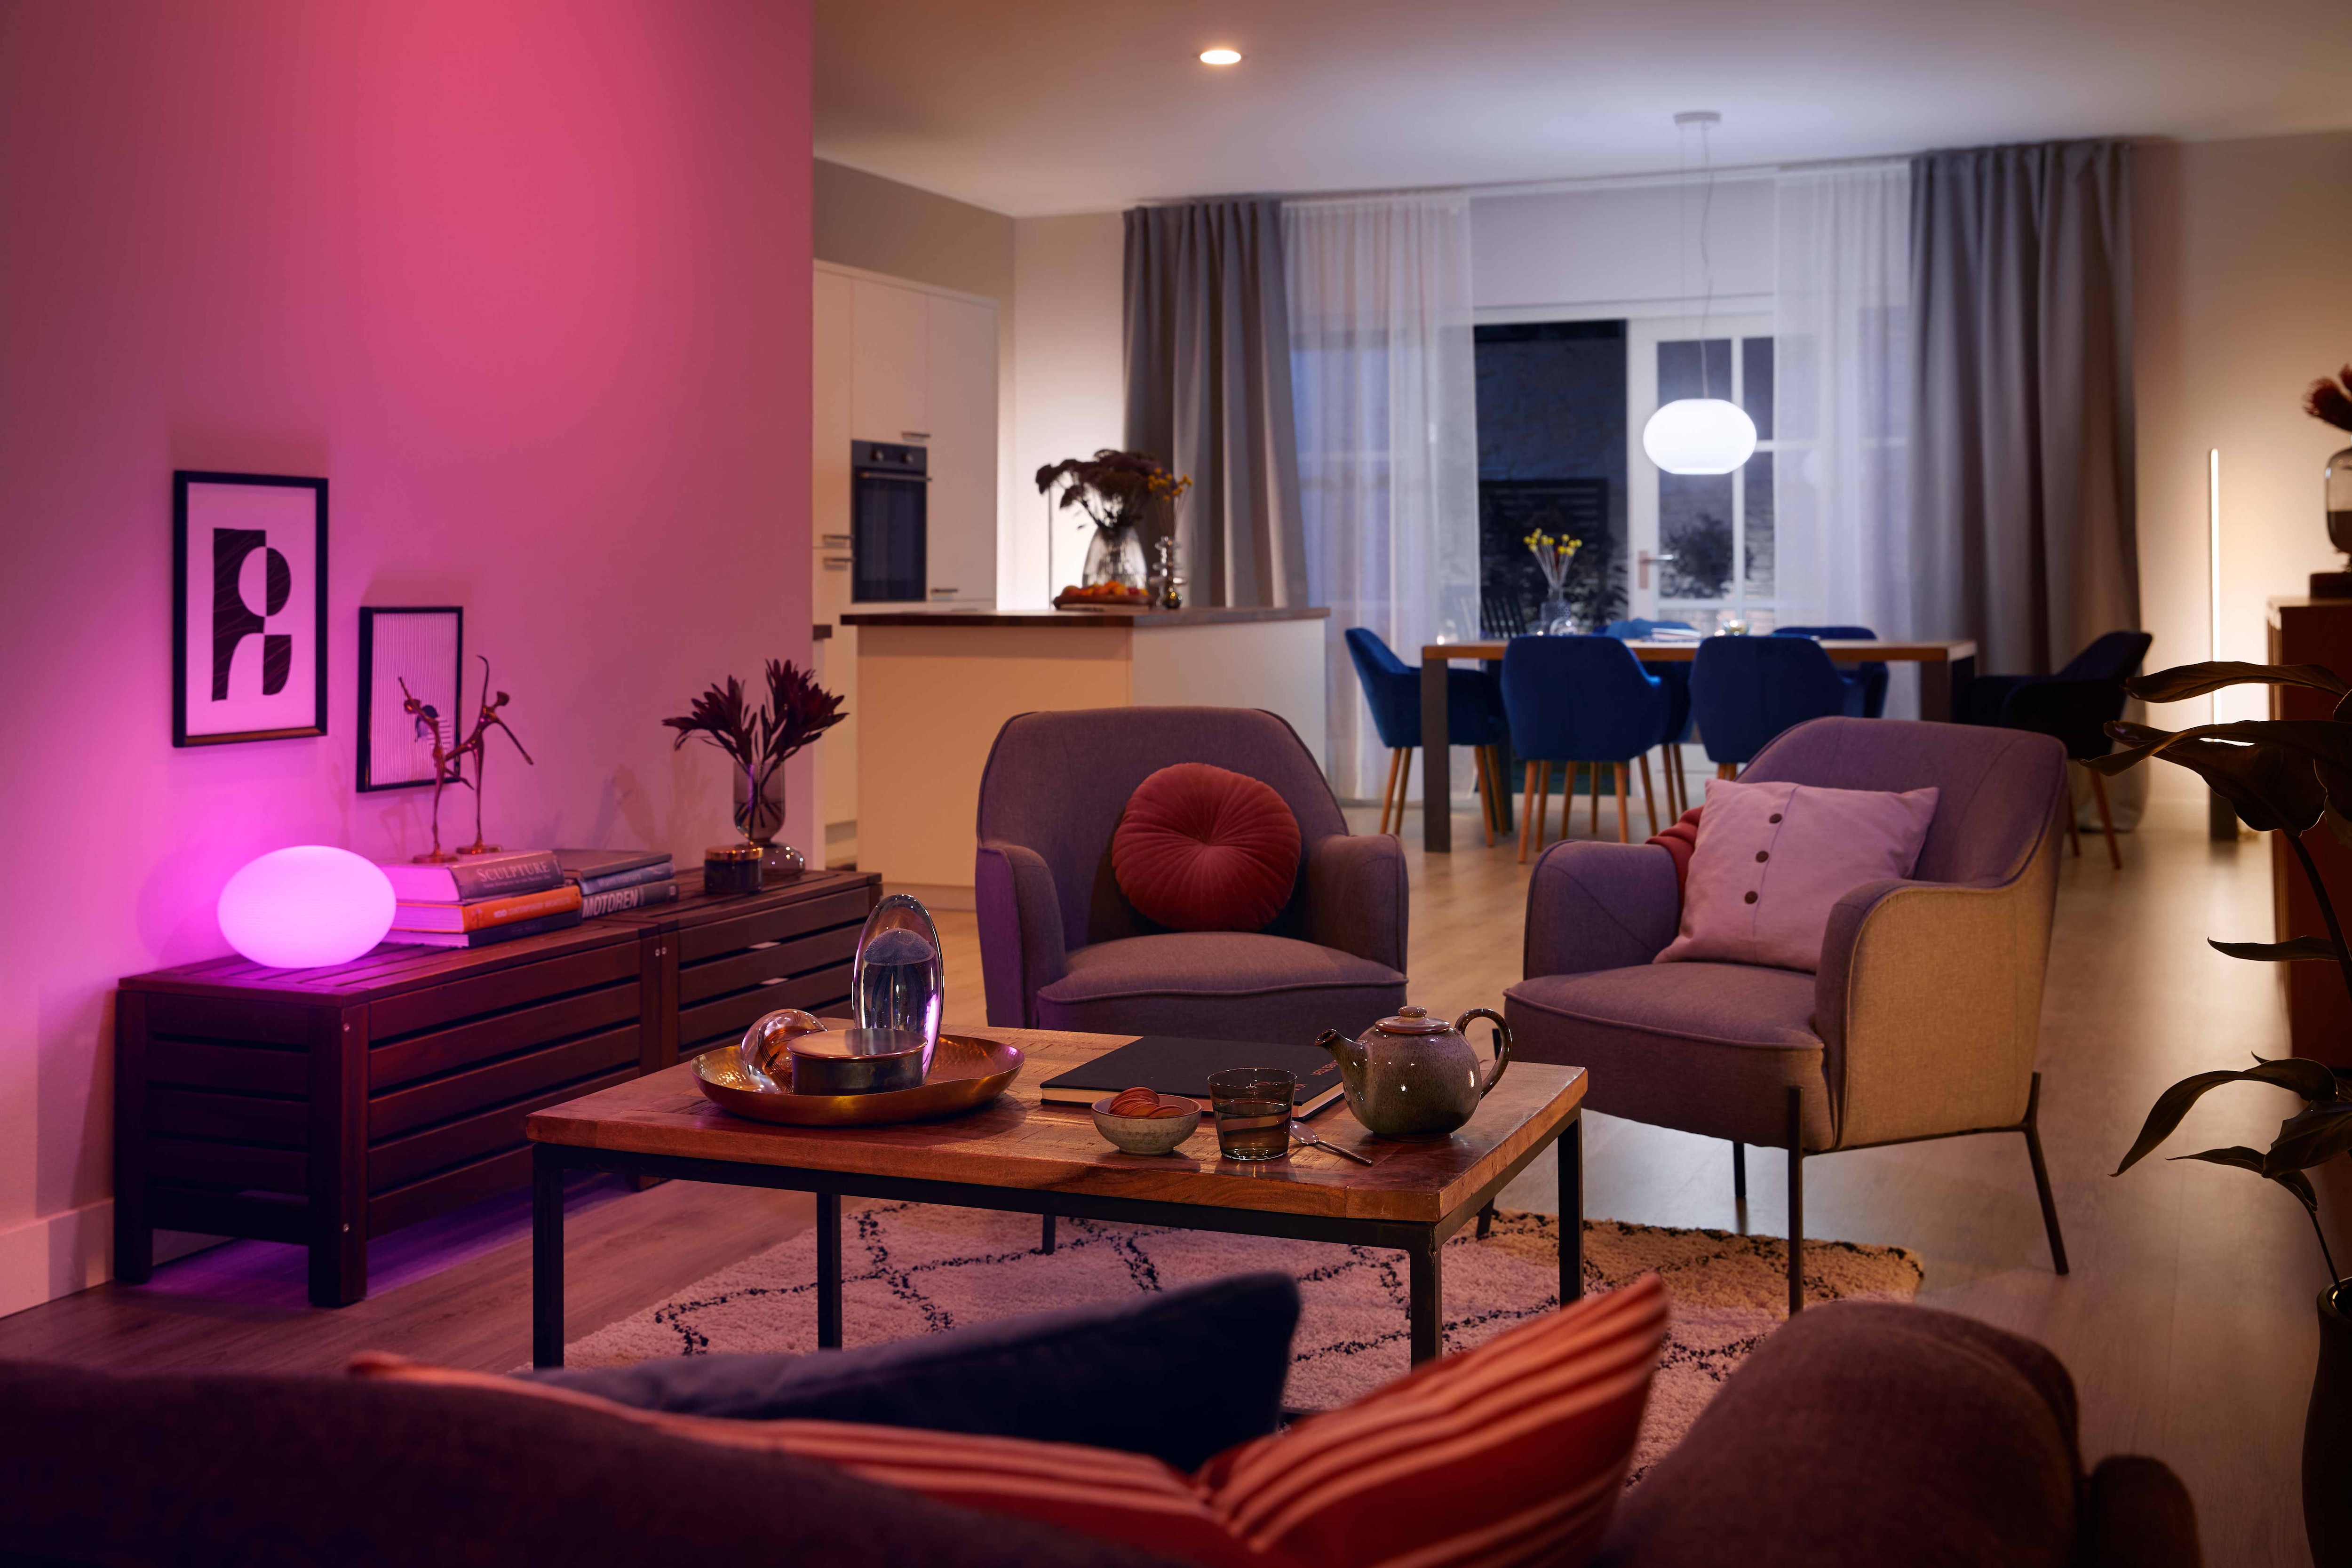 hue party phillips hue